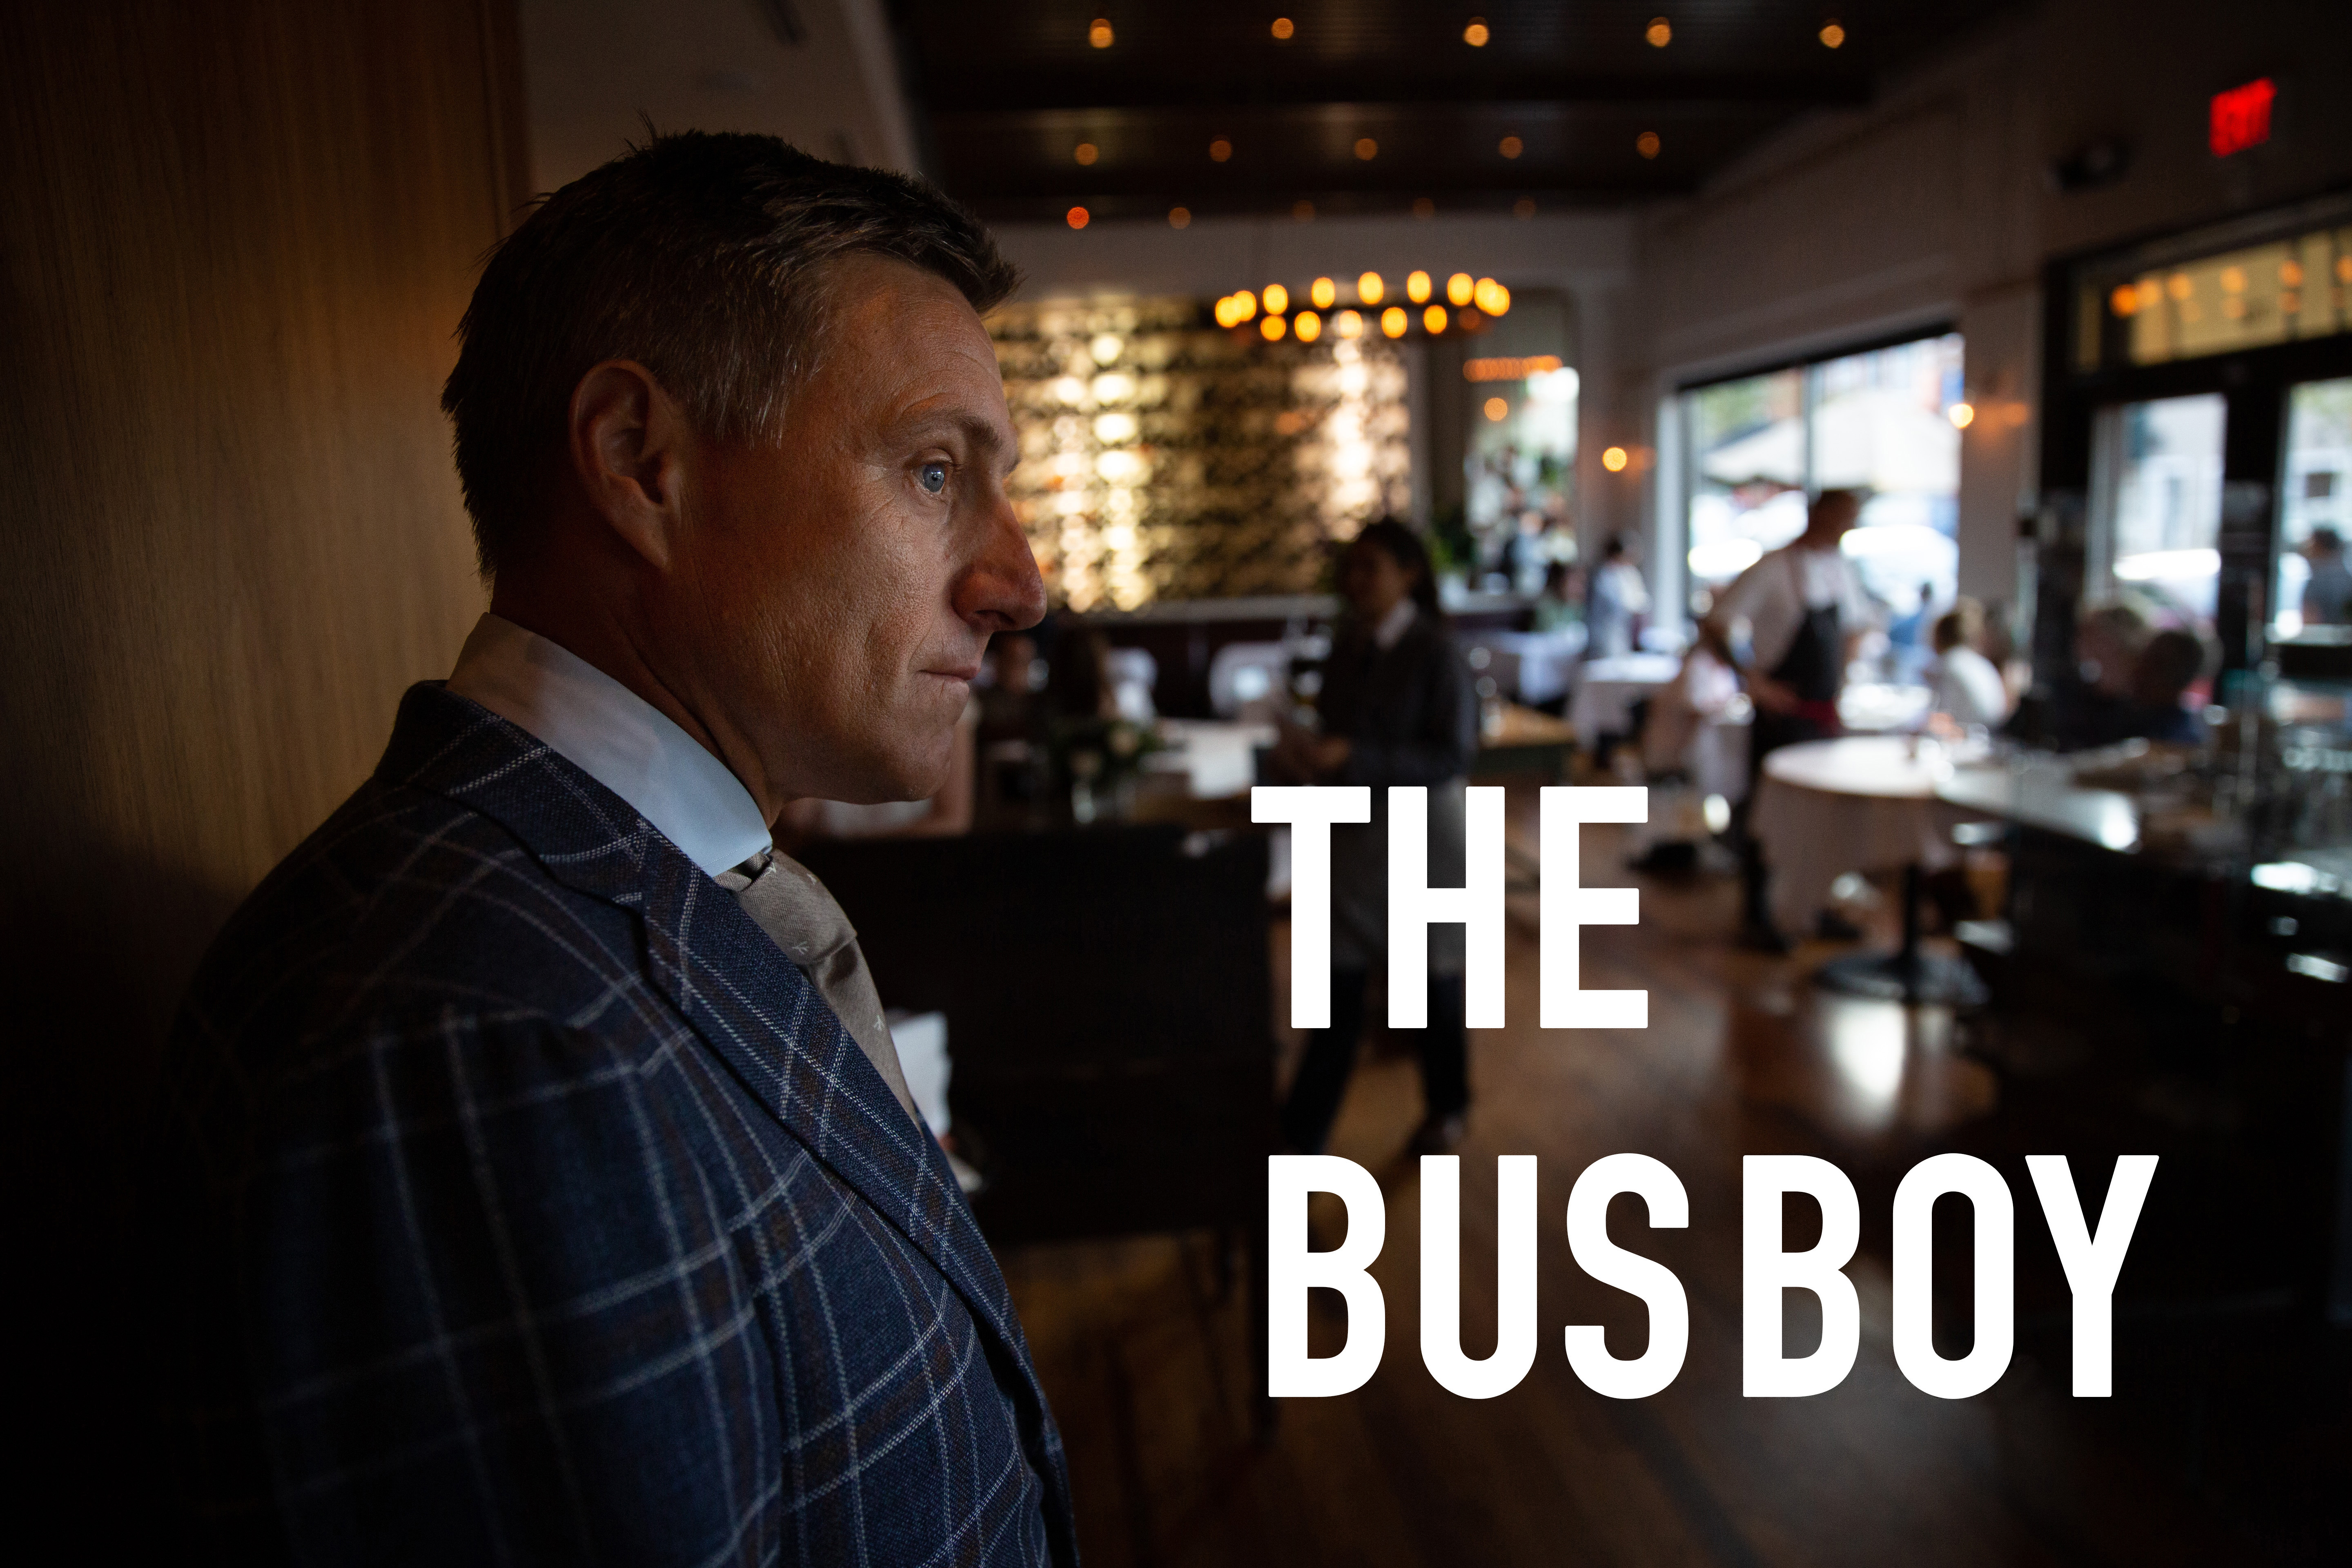 busboy interview questions